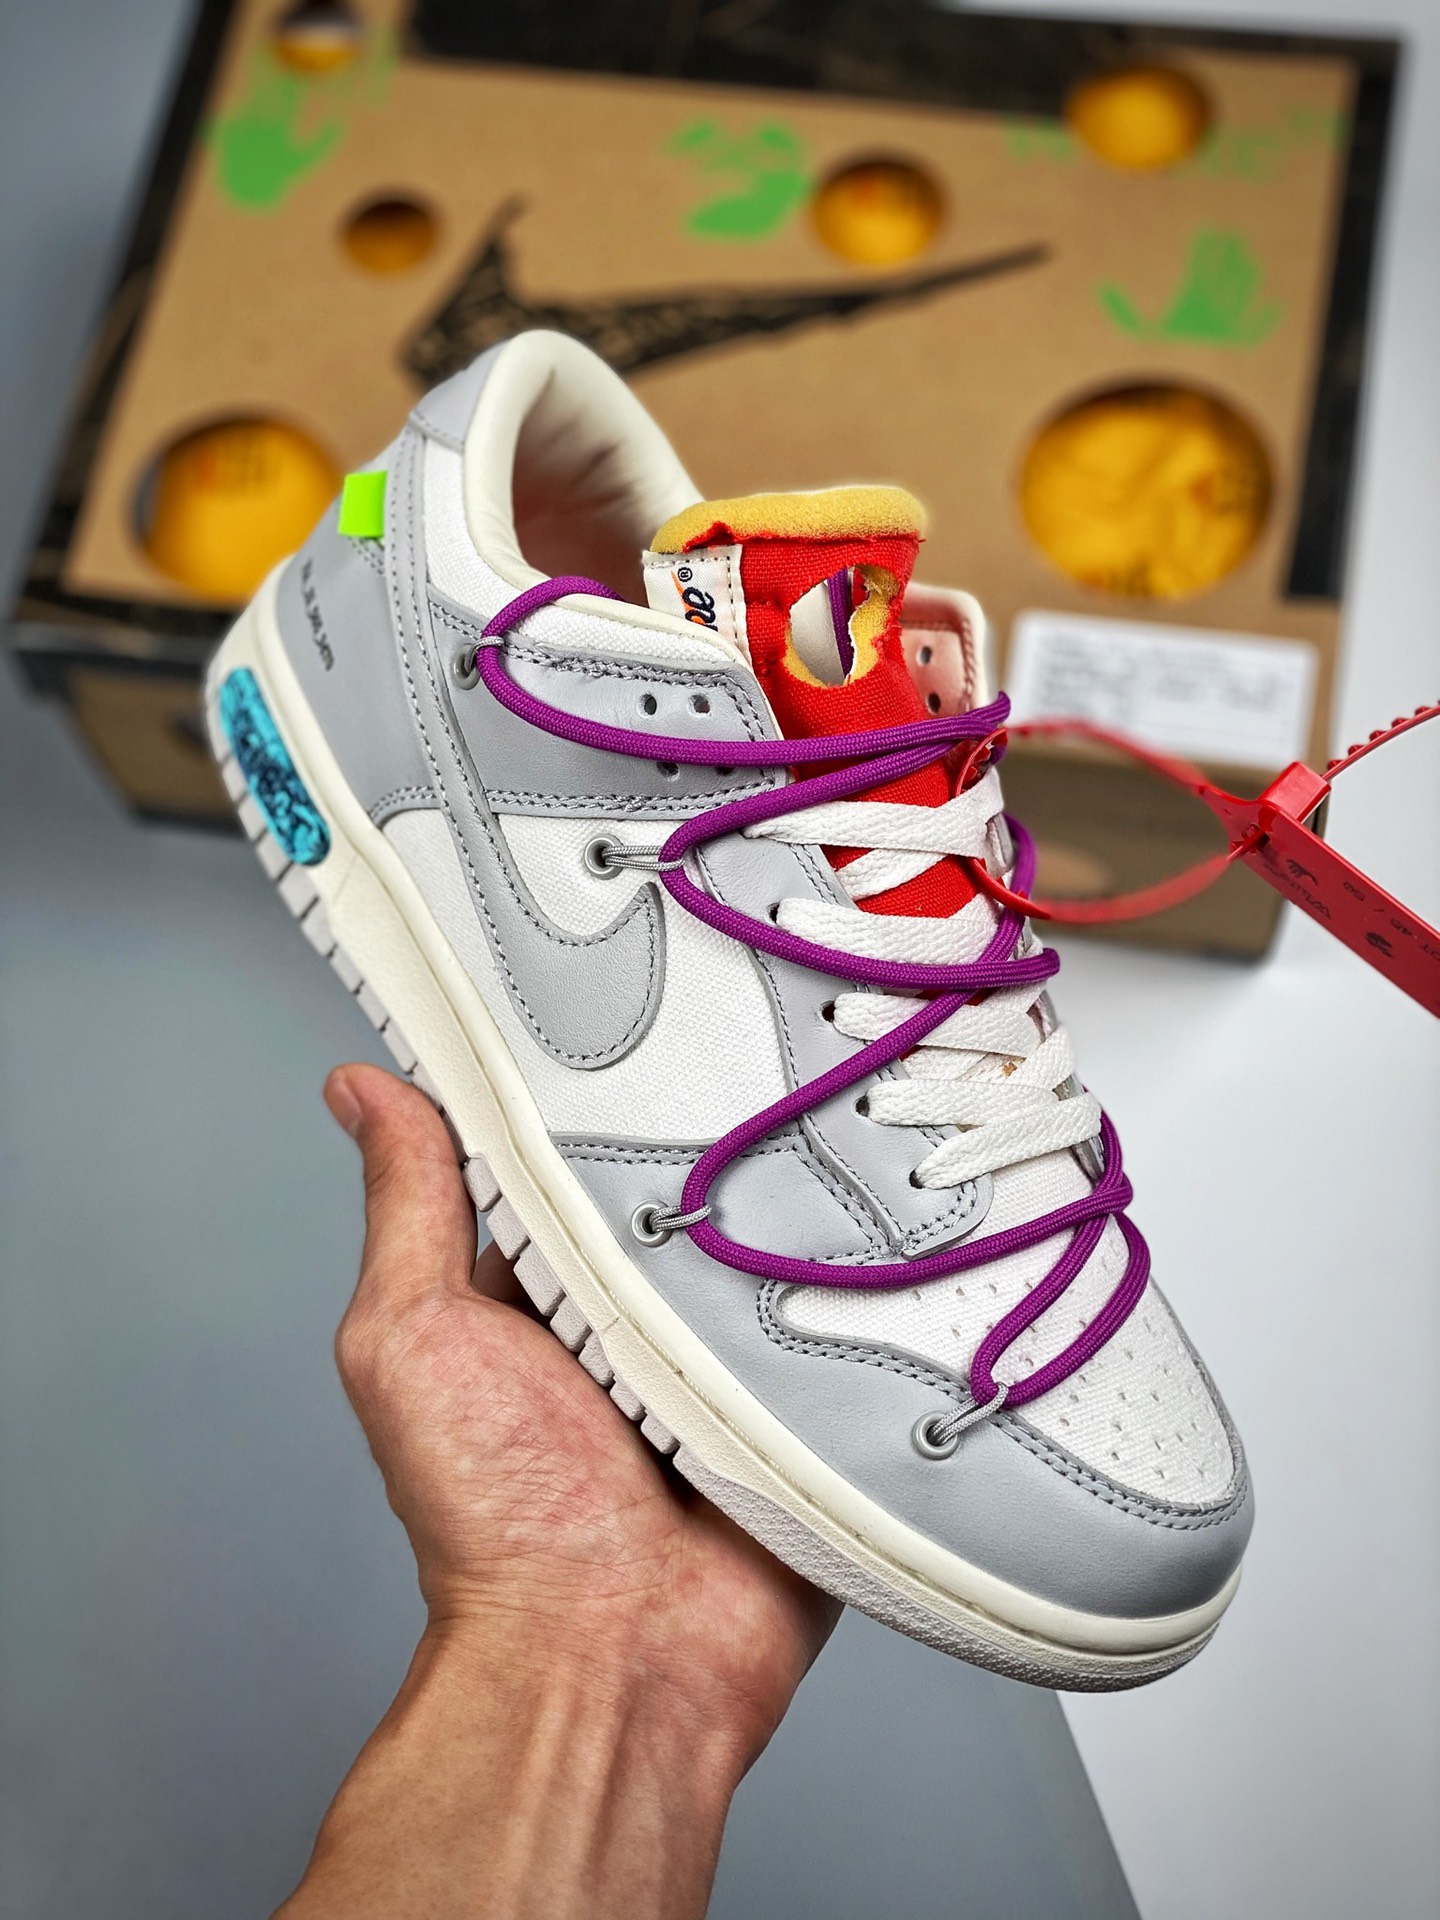 OFFWHITEoff-white nike dunk low 1 of 50 White - hyph3n.com